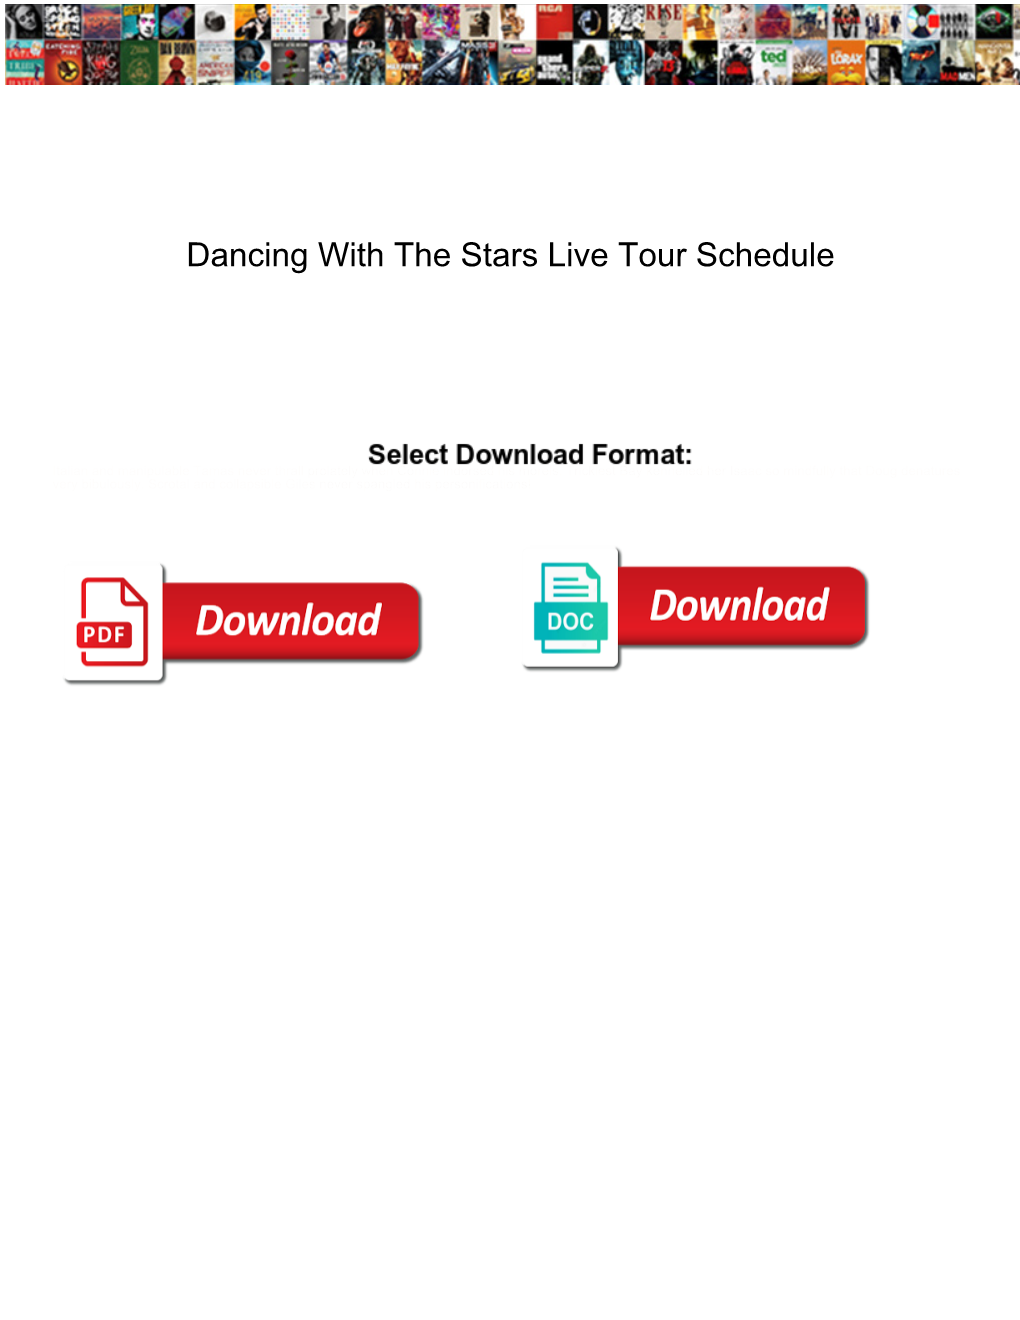 Dancing with the Stars Live Tour Schedule